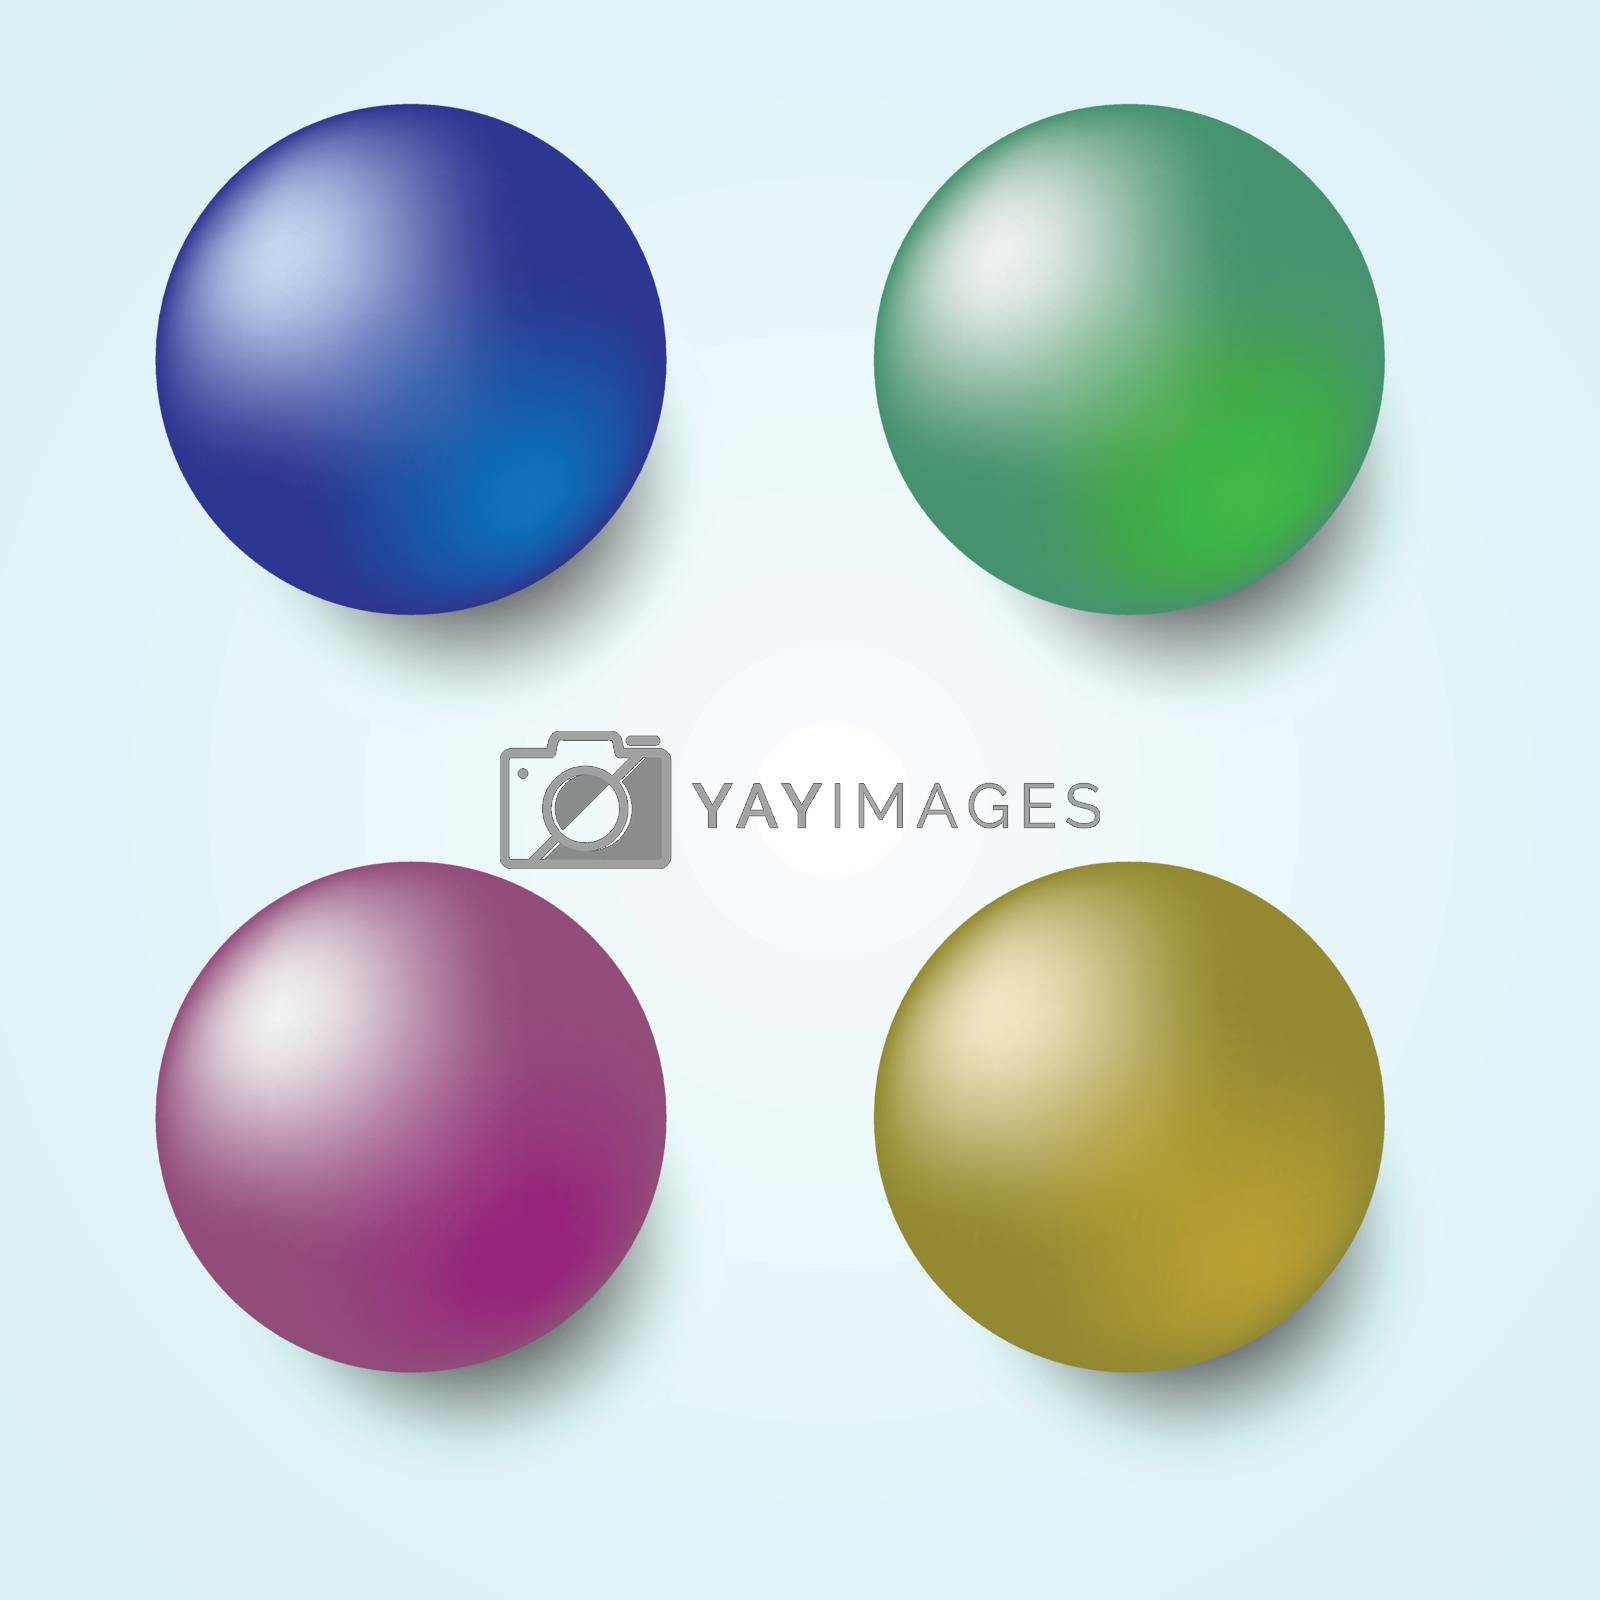 Royalty free image of Colorful 3D sphere isolated on white background by punsayaporn